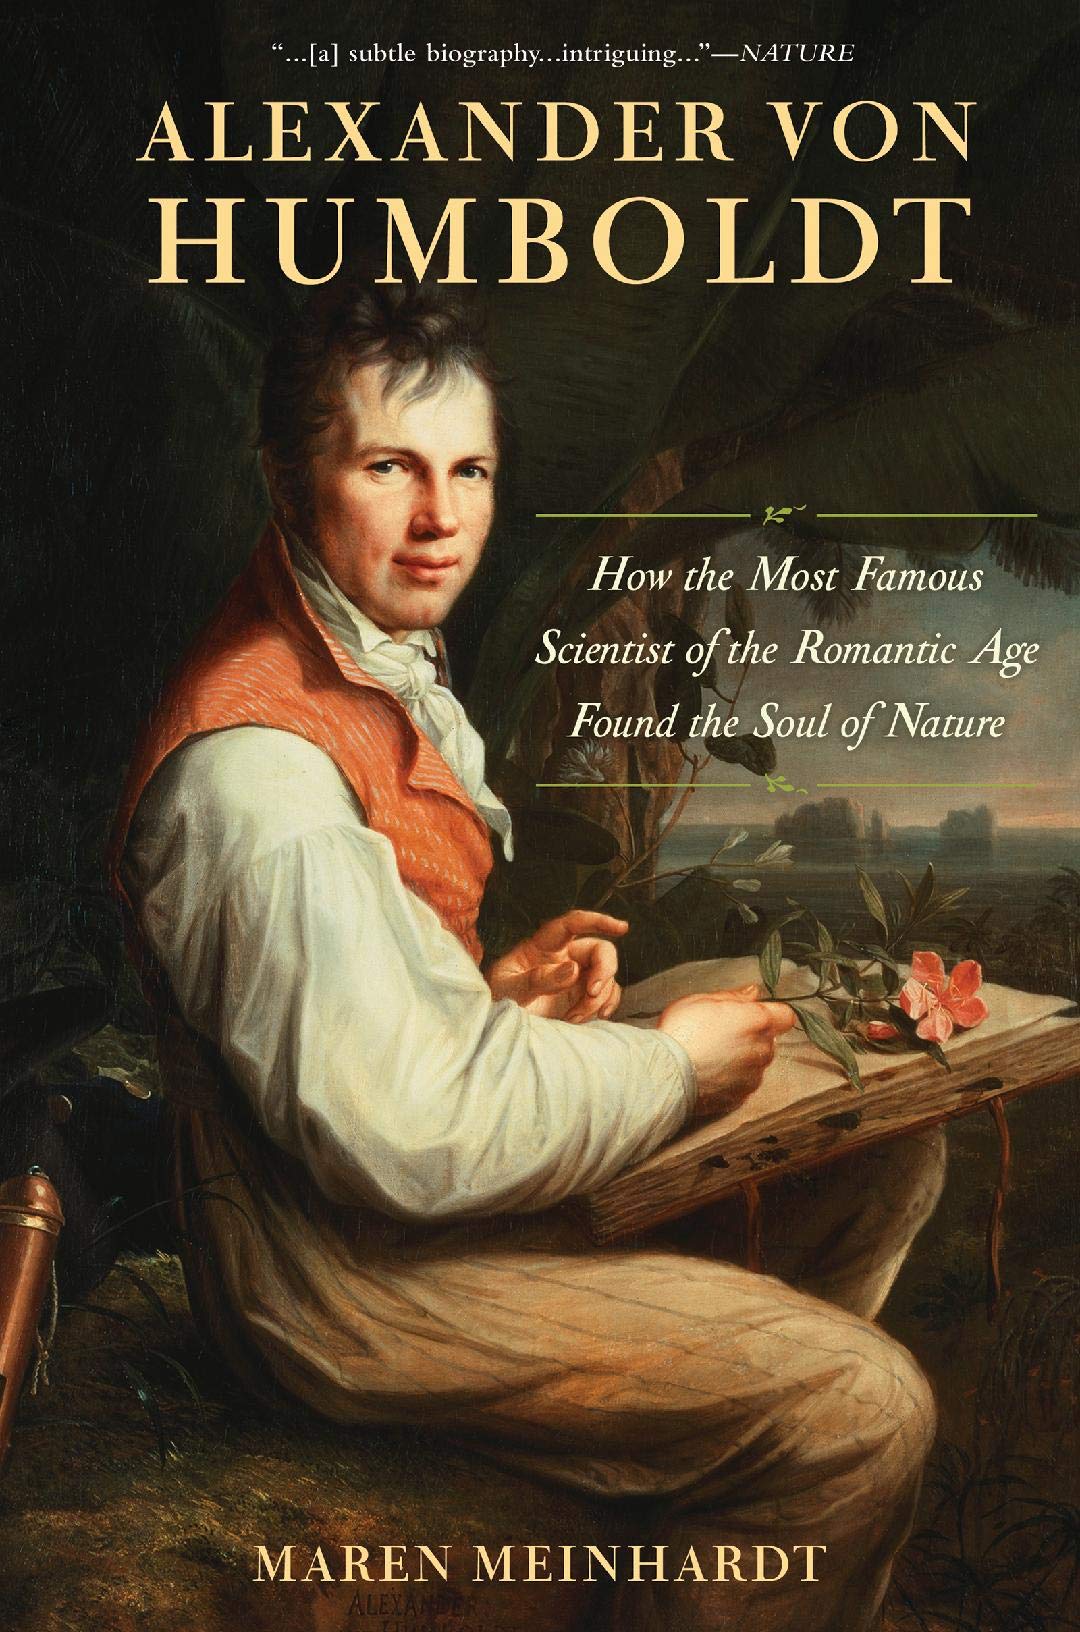 Alexander von Humboldt: How the Most Famous Scientist of the Romantic Age Found the Soul of Nature